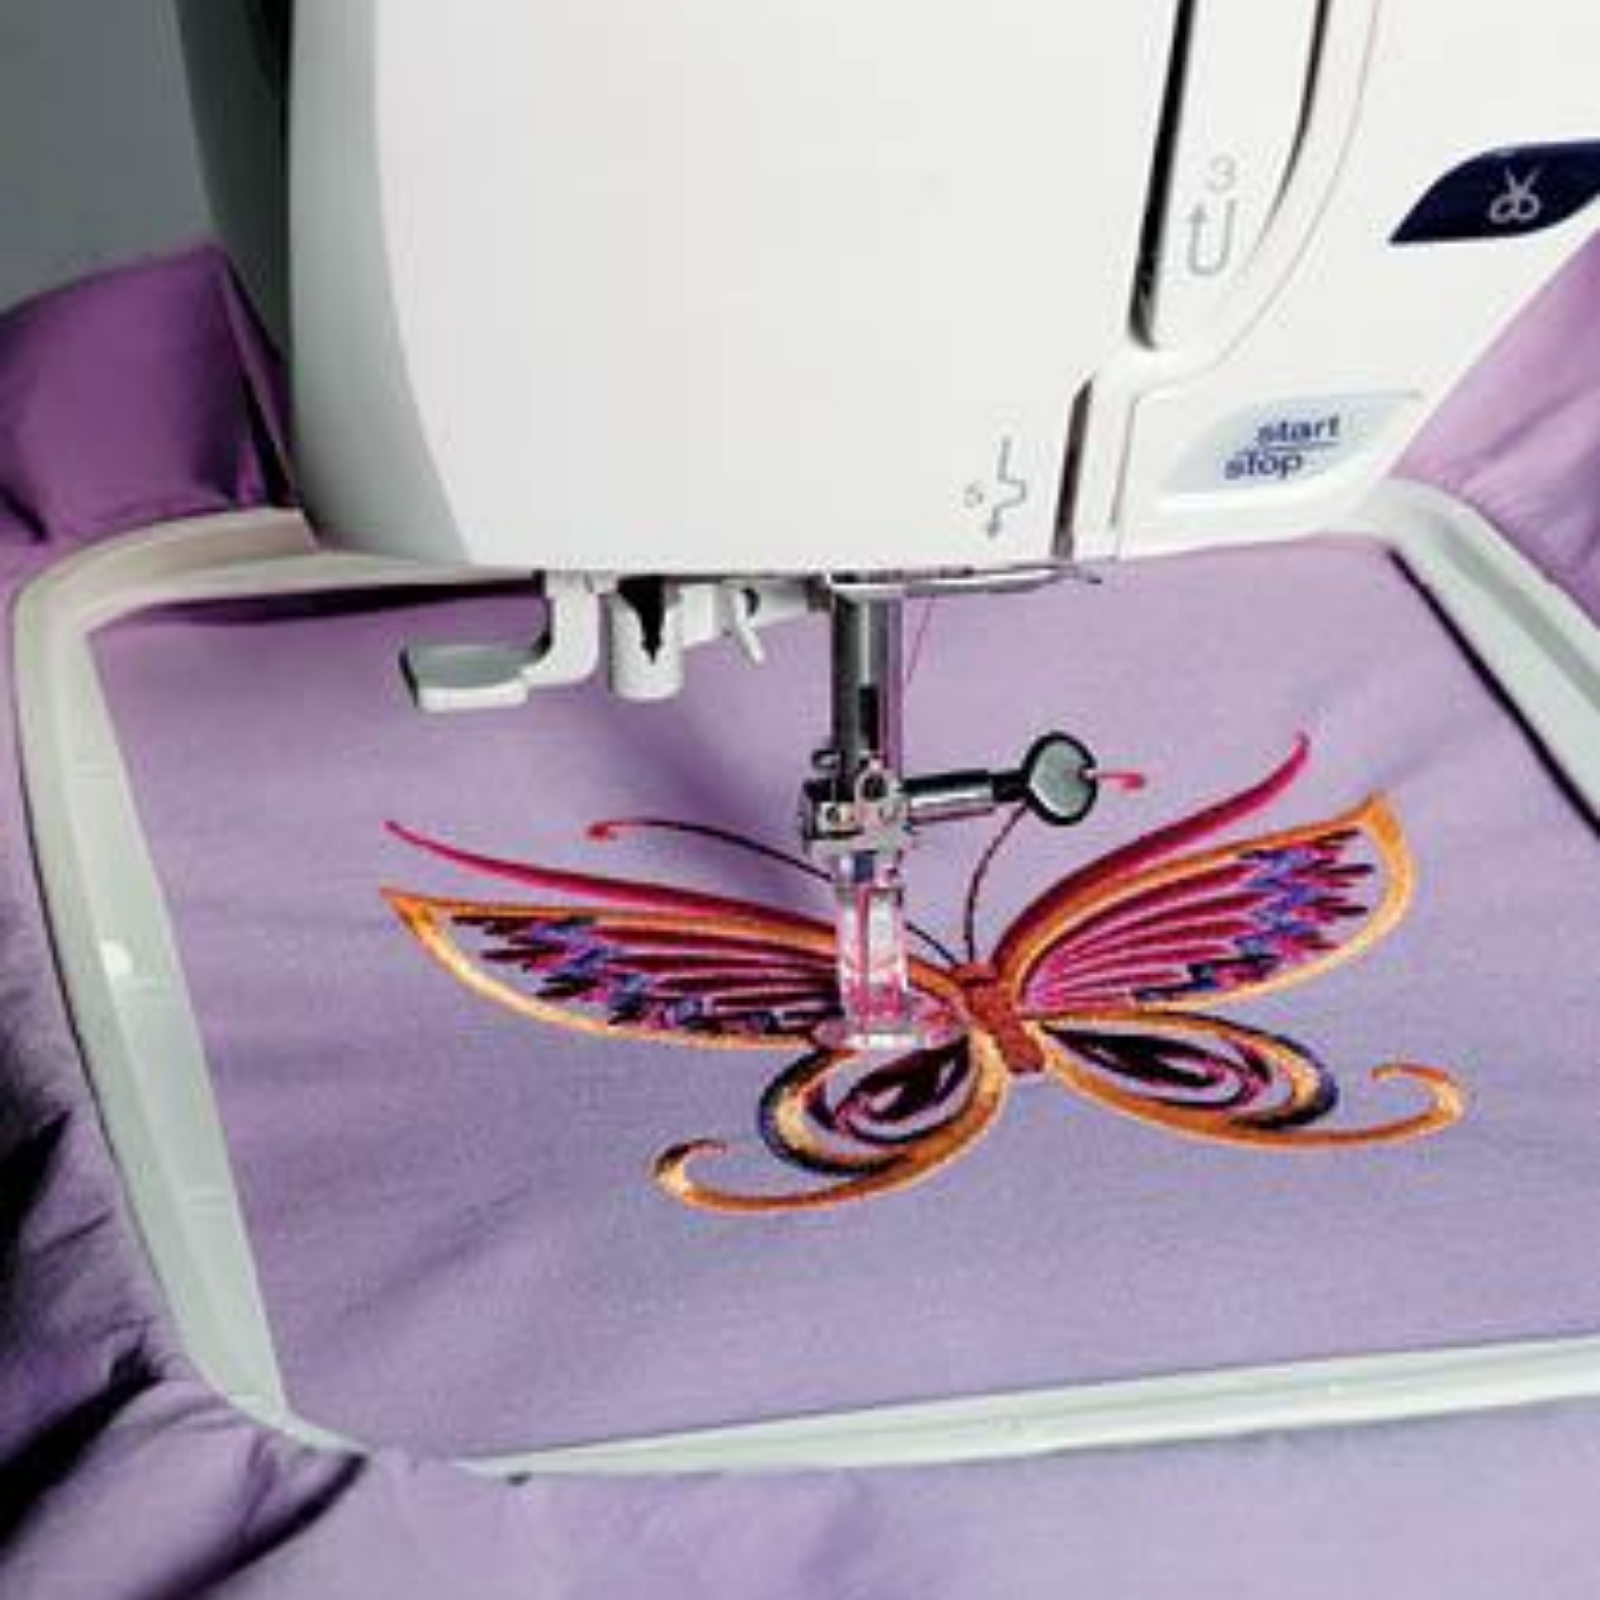 Elna Air Artist WiFi Enabled Embroidery Machine, 260 Built-In Designs & 12 Fonts - up to 400 stitches per minute